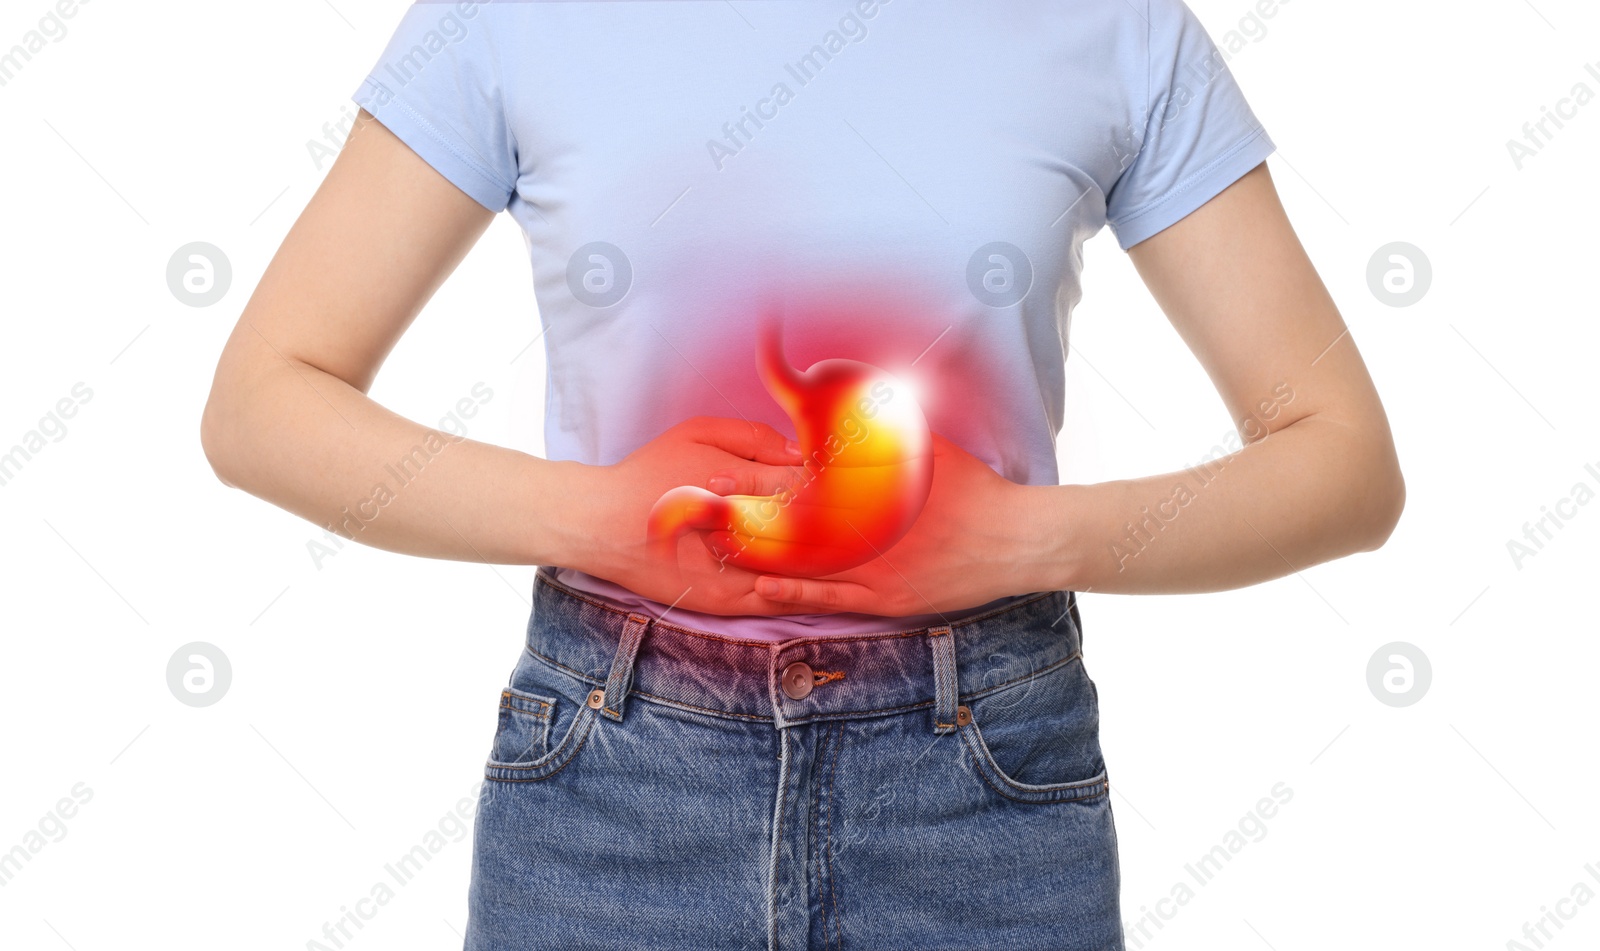 Image of Woman suffering from abdominal pain on white background, closeup. Illustration of unhealthy stomach